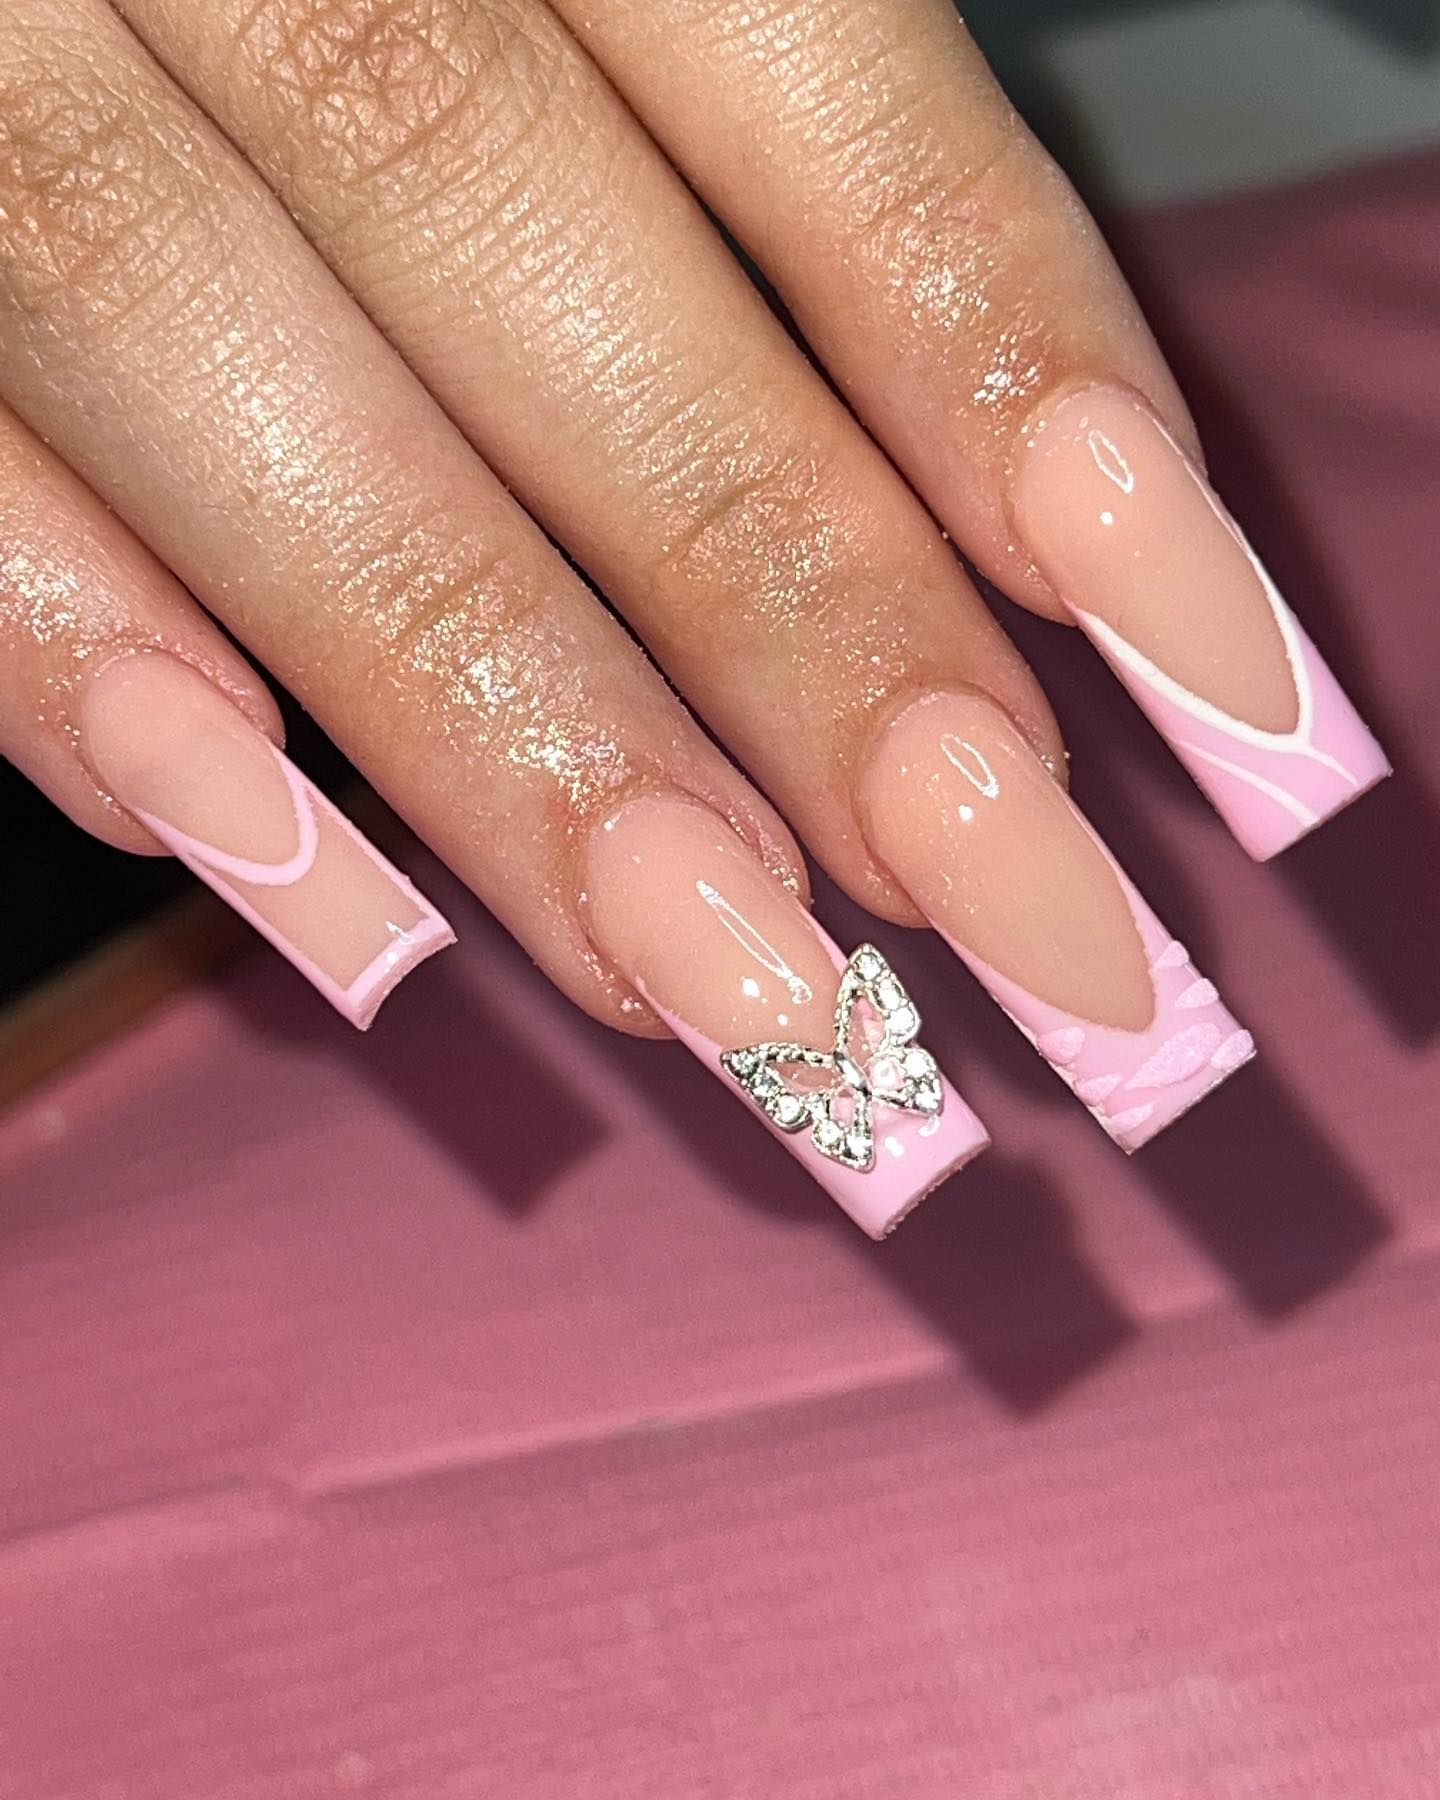 True ultimate Barbie pink manicure! This type of French design with a cool and cute little butterfly gemstone design will look perfect on women who are in their twenties, and are all about that poppy TikTok trend vibe!